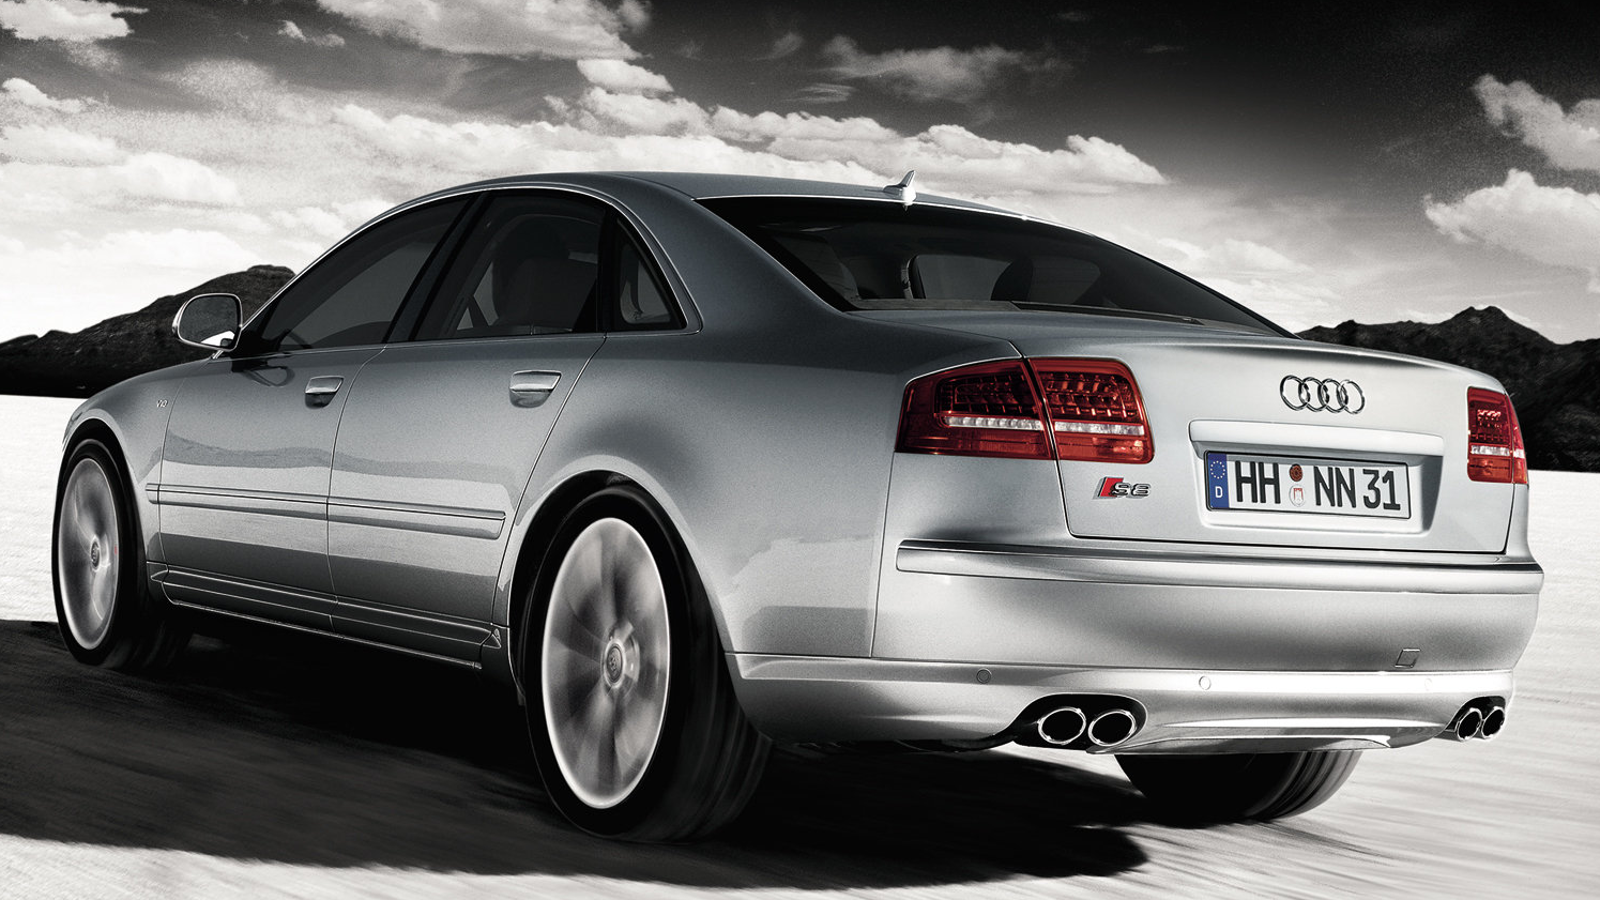 You Can Buy A Lamborghini-Powered Audi S8 For The Price Of ...